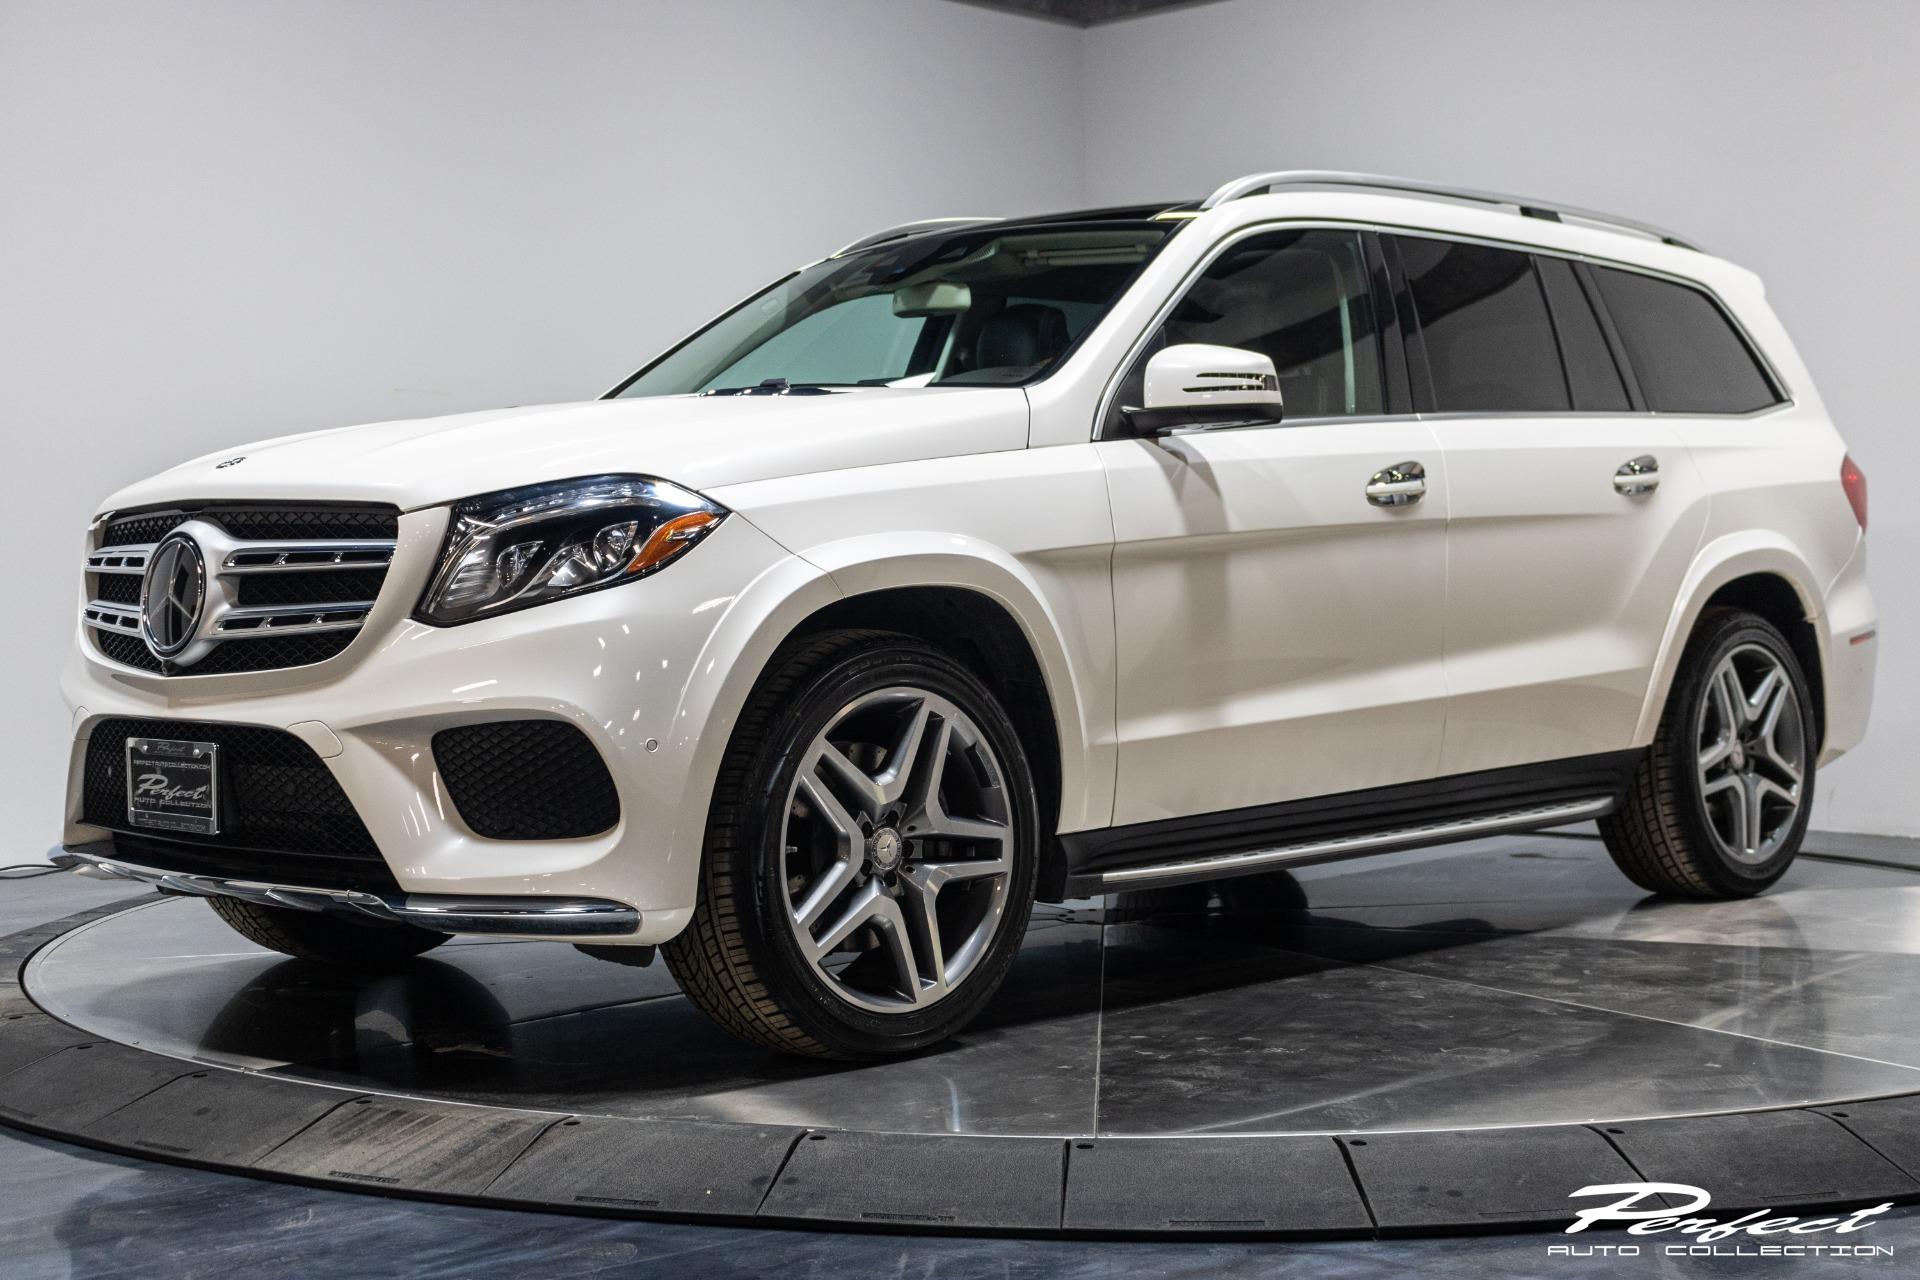 Used 2017 MercedesBenz GLS GLS 550 4MATIC For Sale (59,993) Perfect